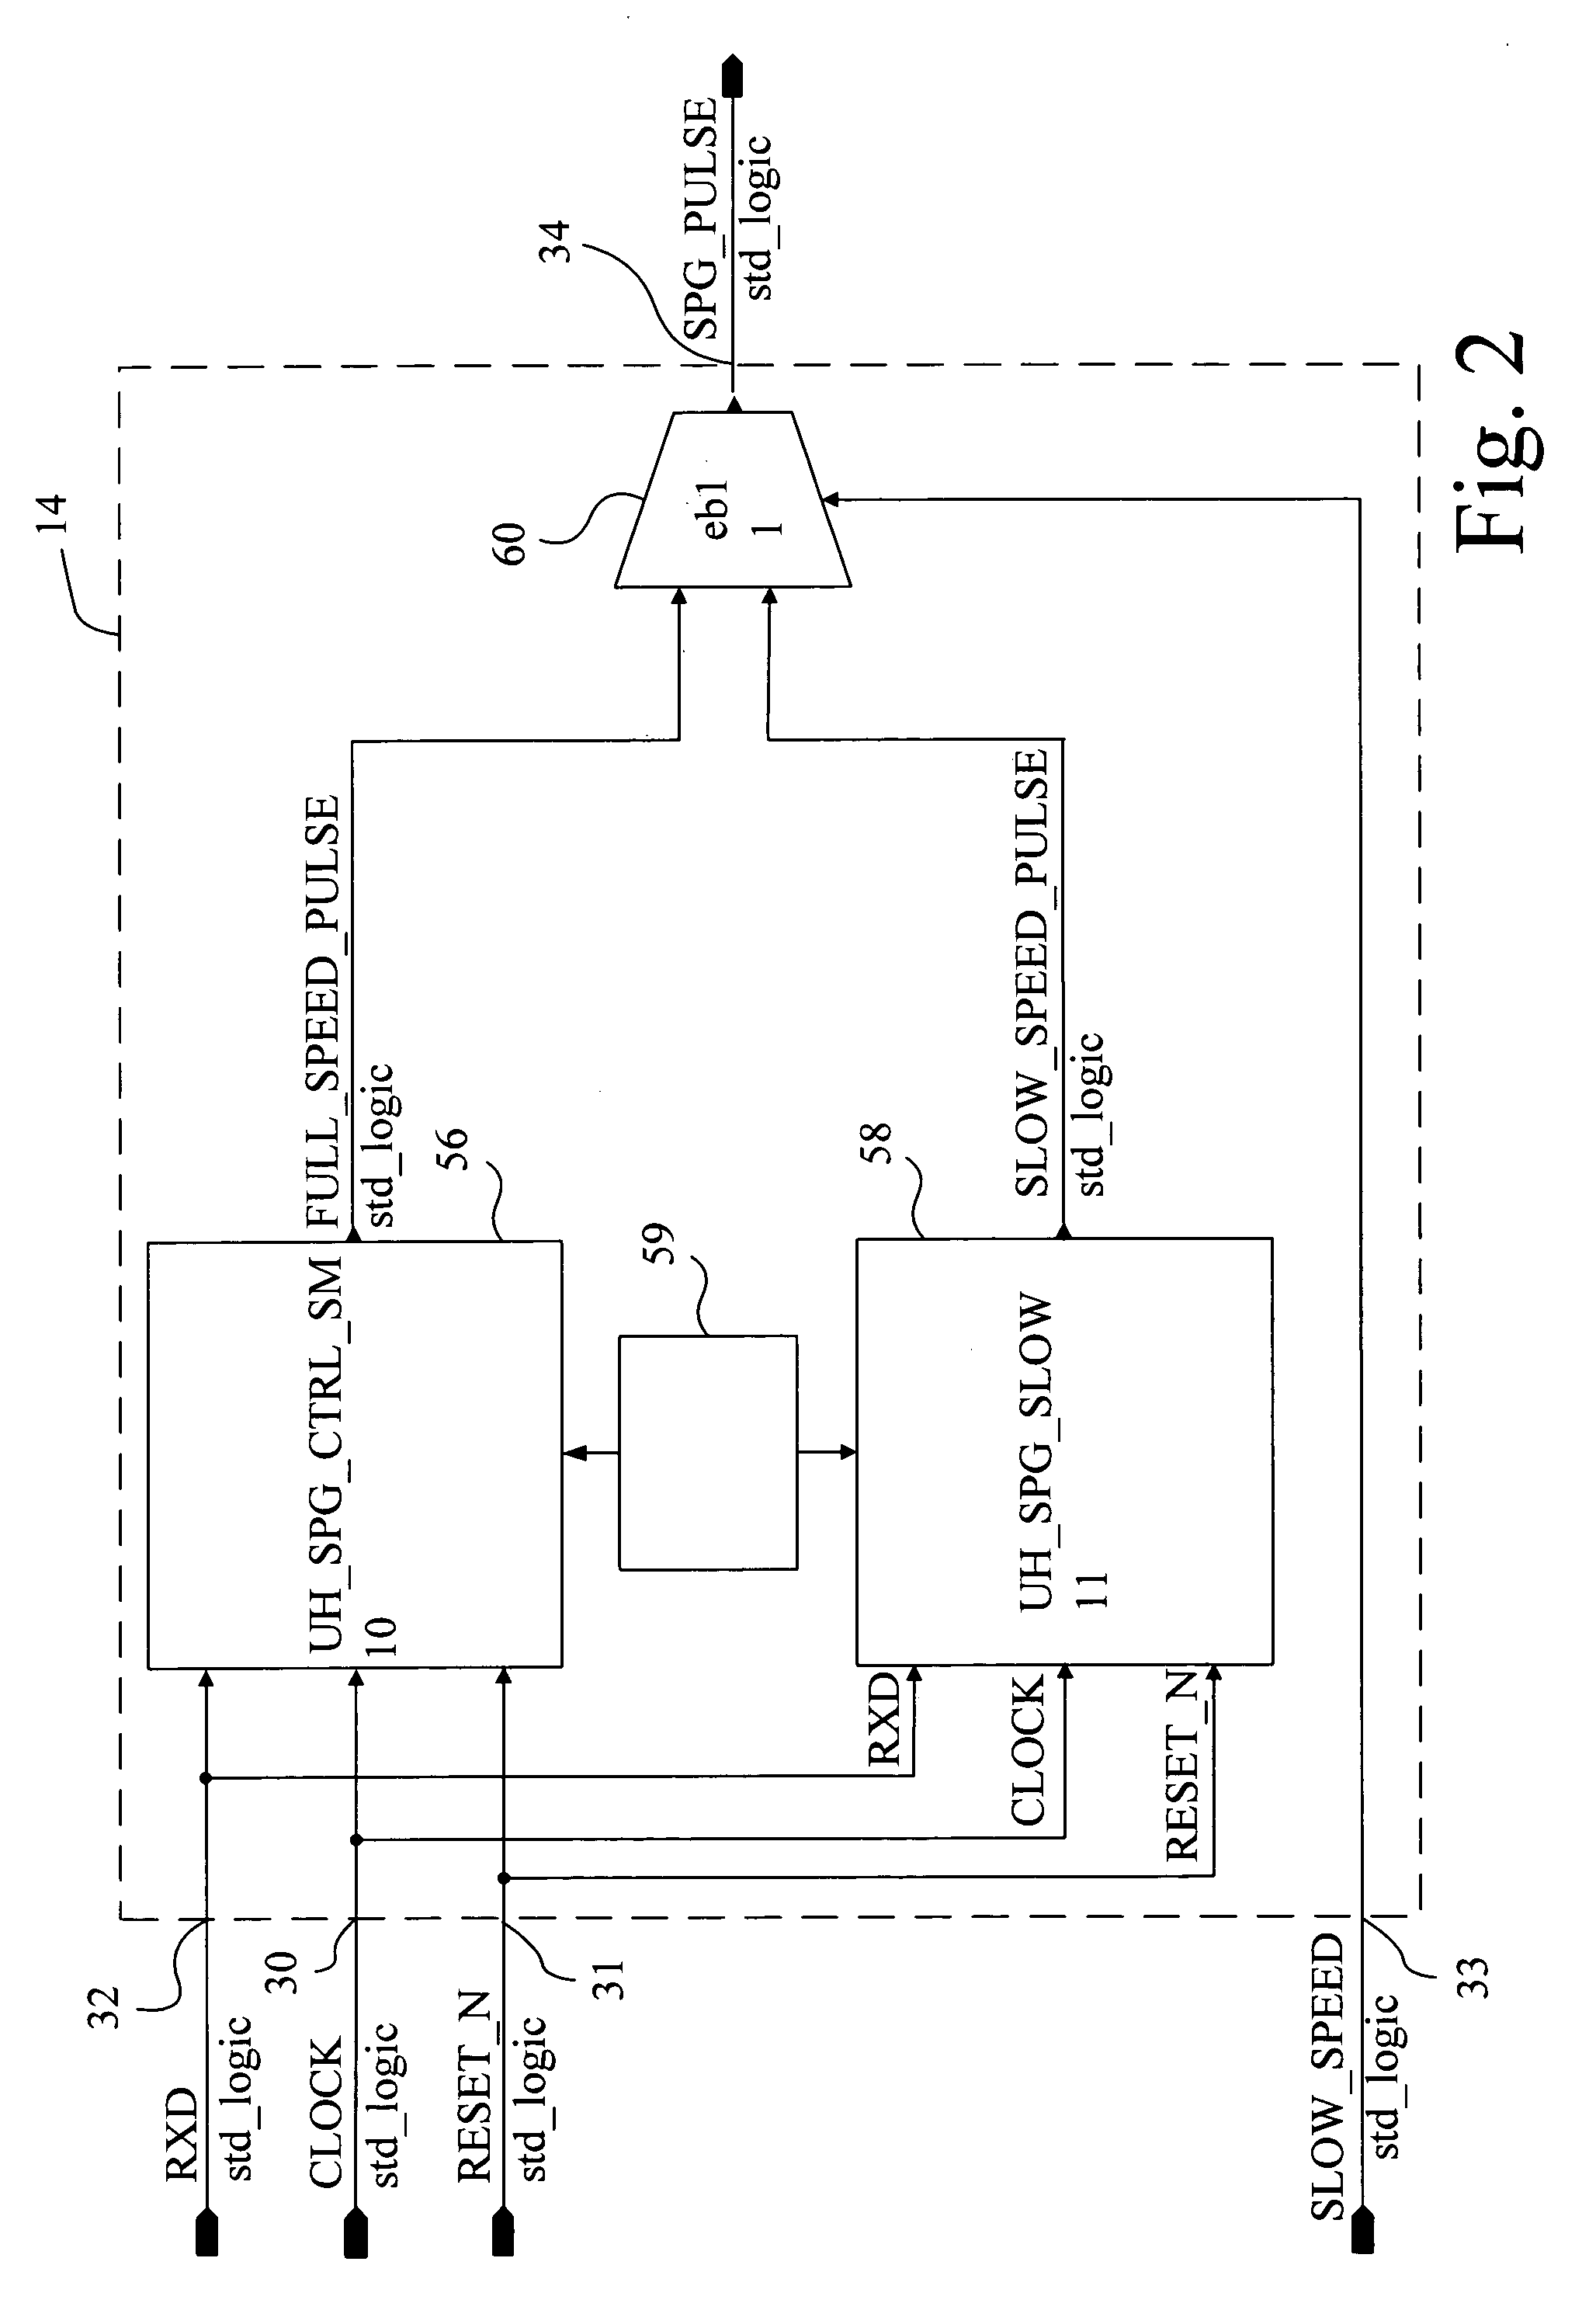 Method and apparatus for effecting synchronous pulse generation for use in serial communications